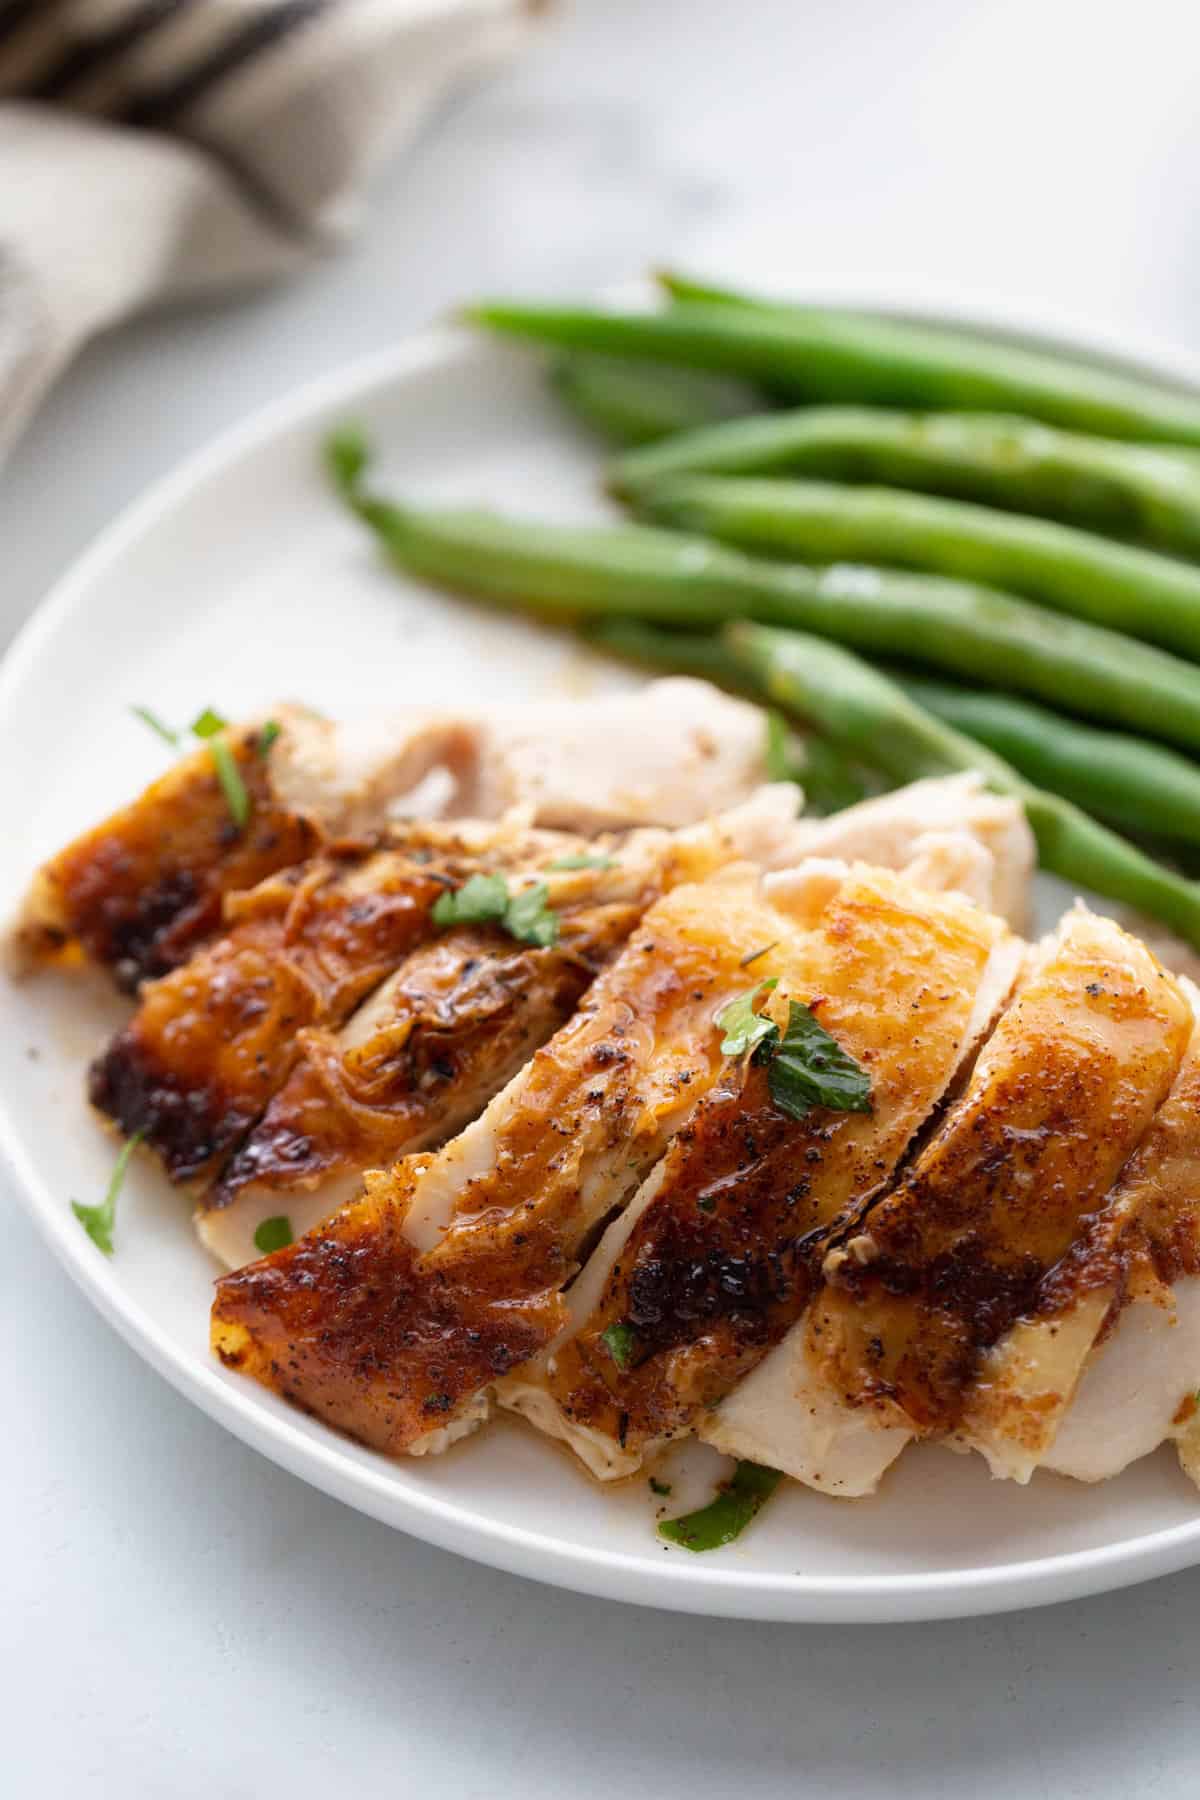 Sliced chicken air fryer chicken breast on a white plate with green beans on the side.